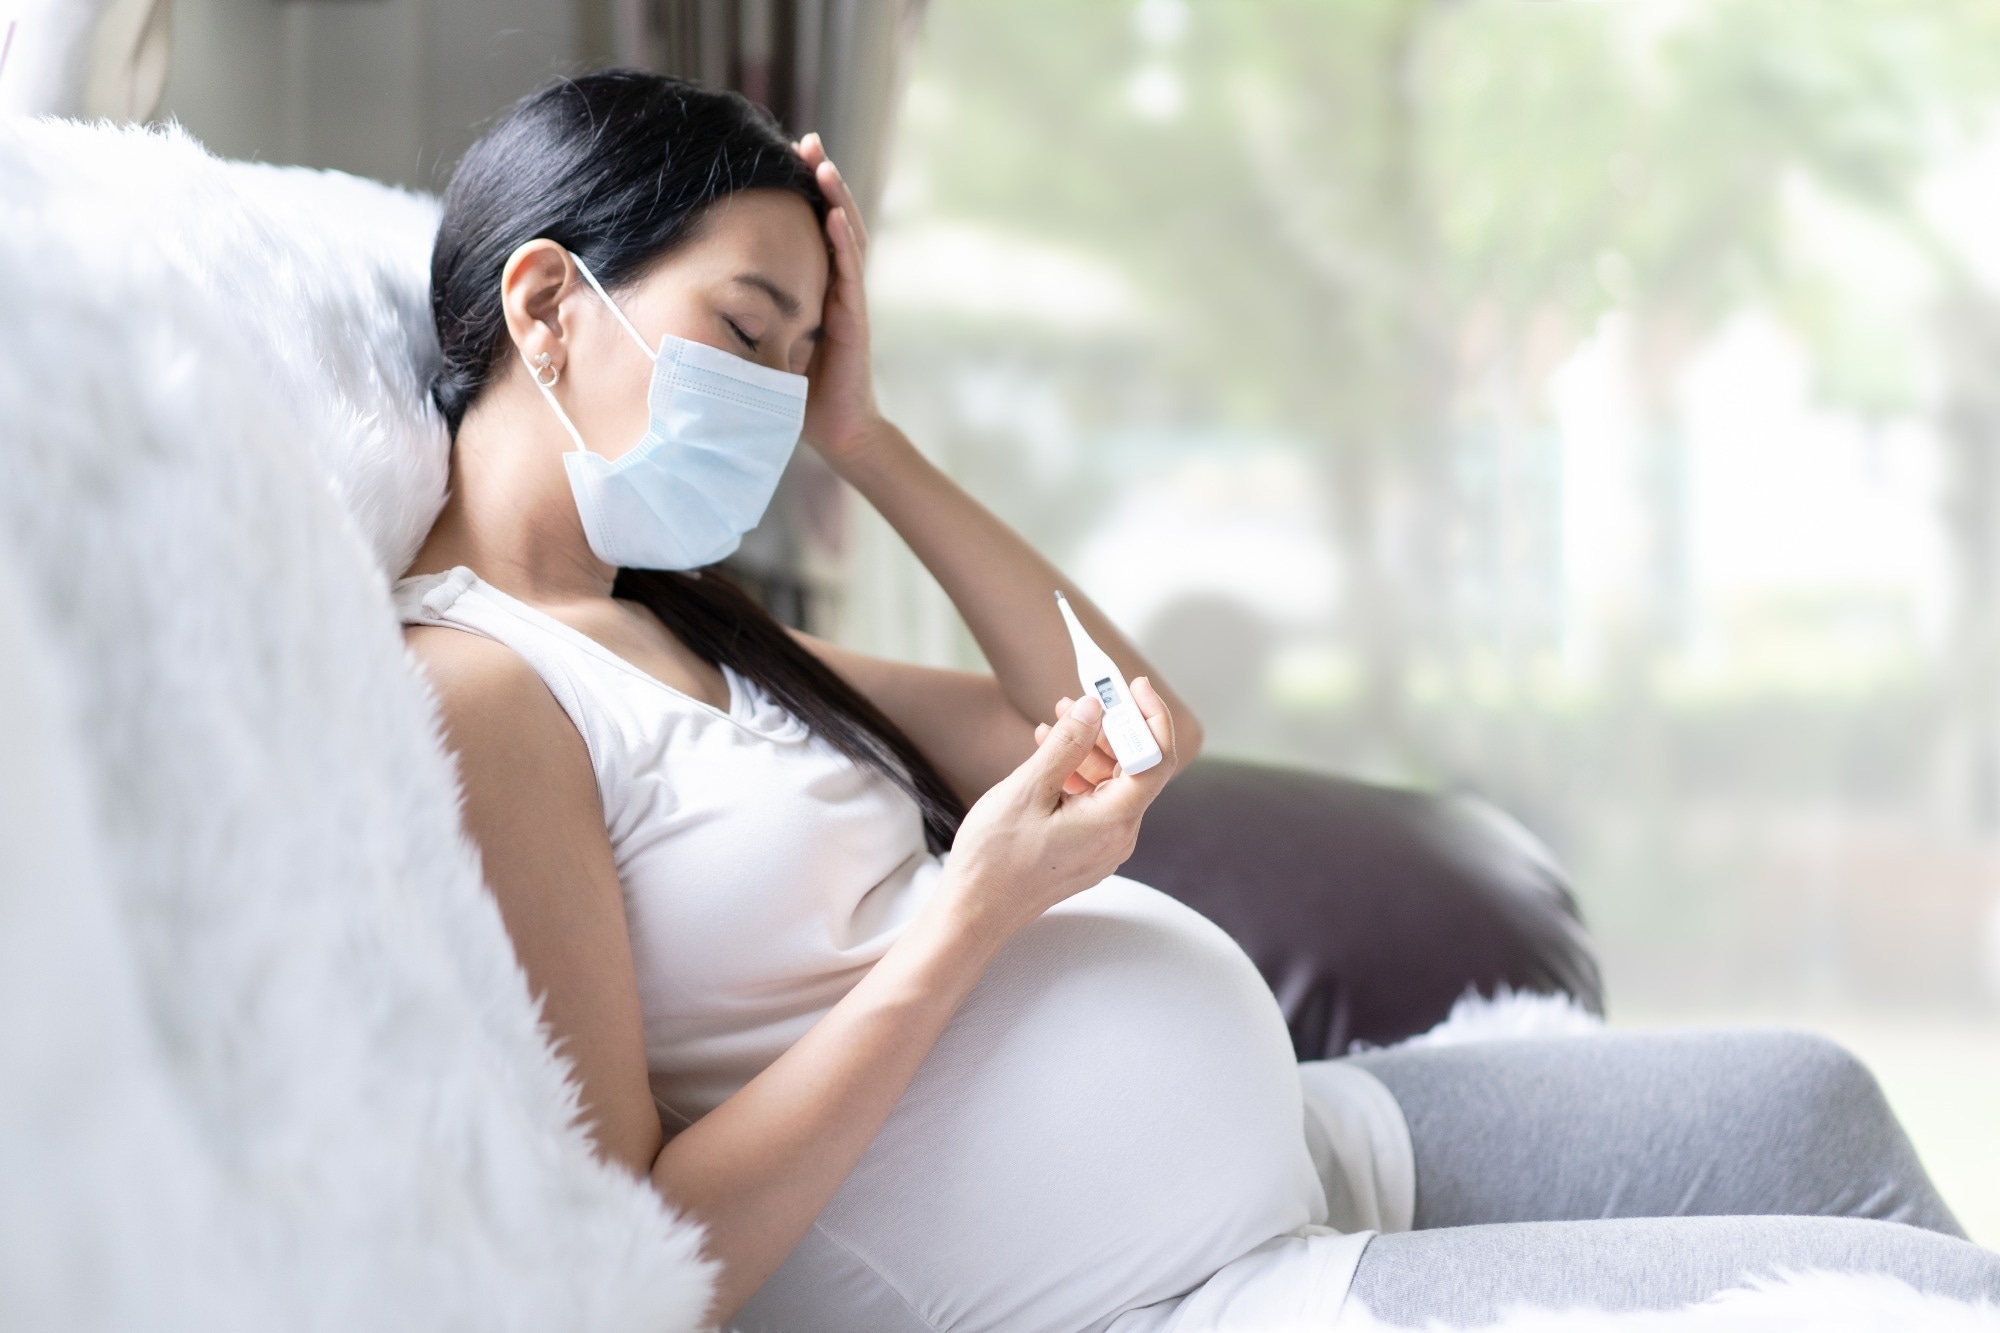 Study: Risk of severe maternal morbidity associated with SARS-CoV-2 infection during pregnancy. Image Credit: SUKJAI PHOTO / Shutterstock